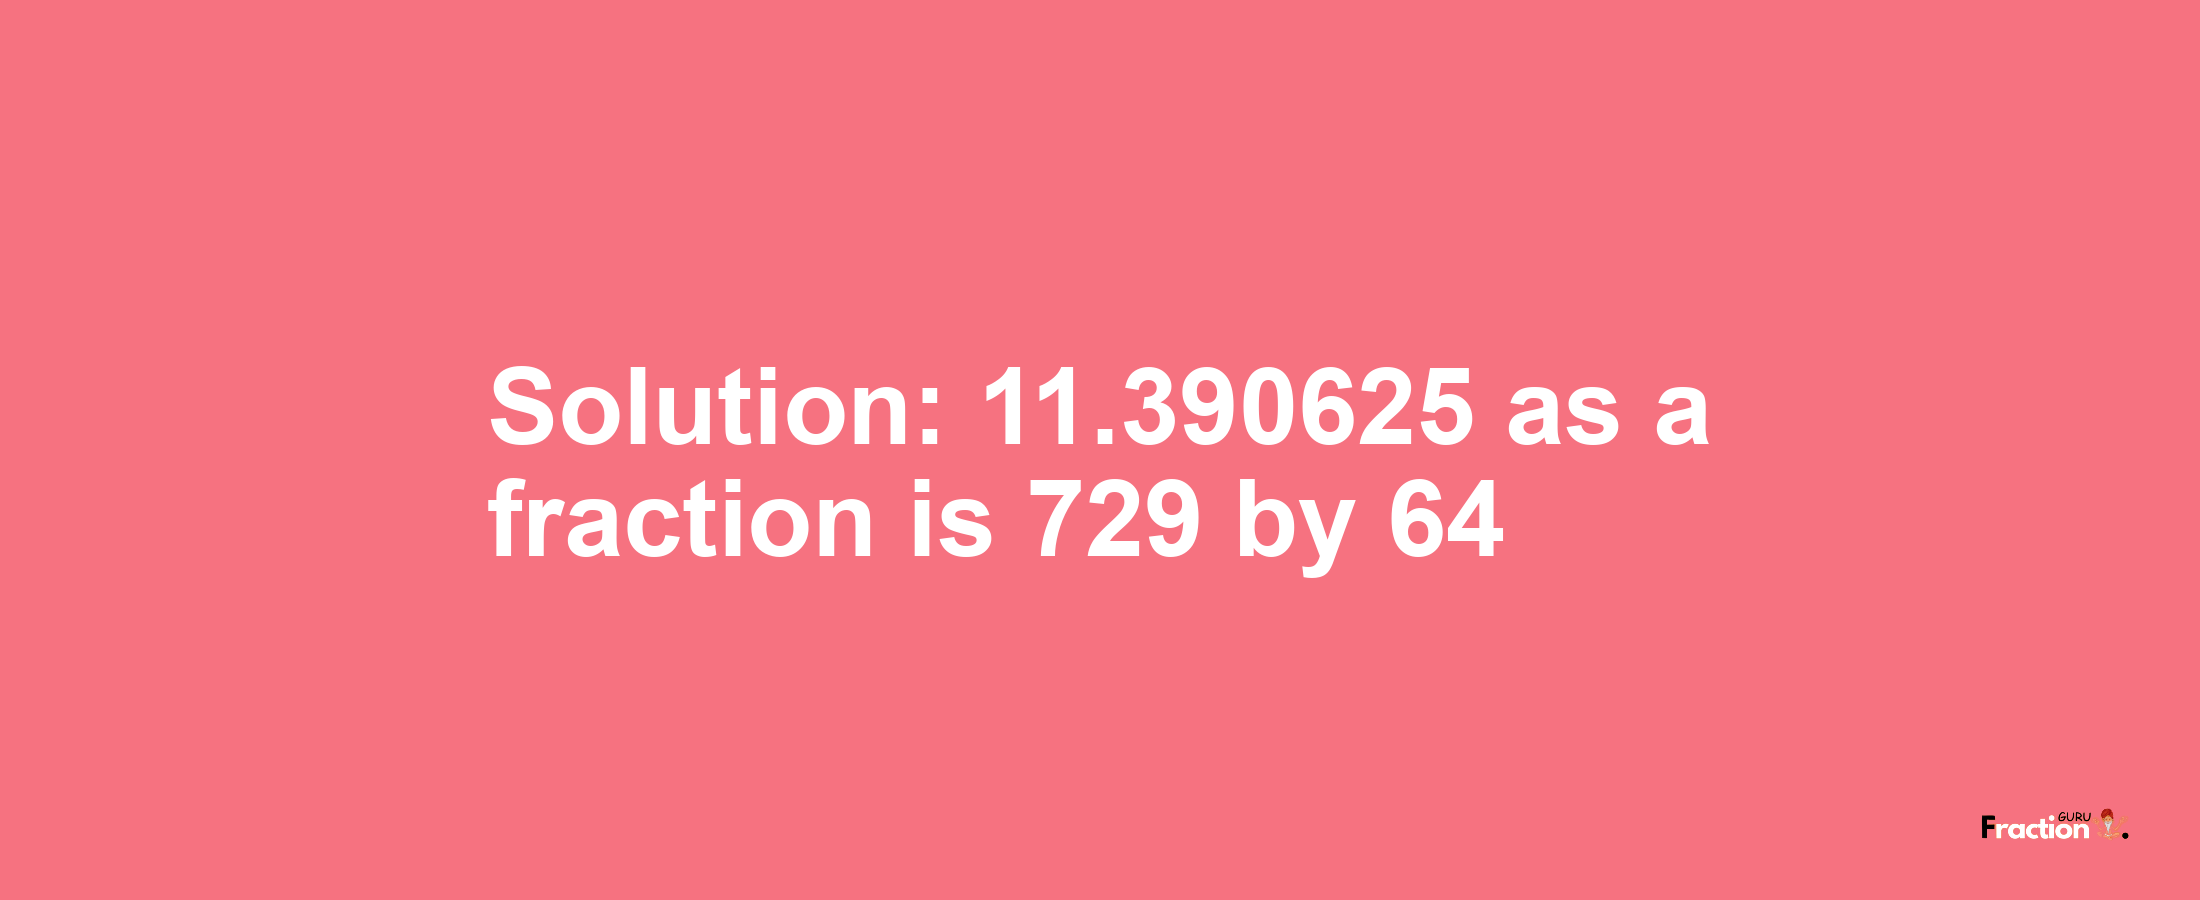 Solution:11.390625 as a fraction is 729/64